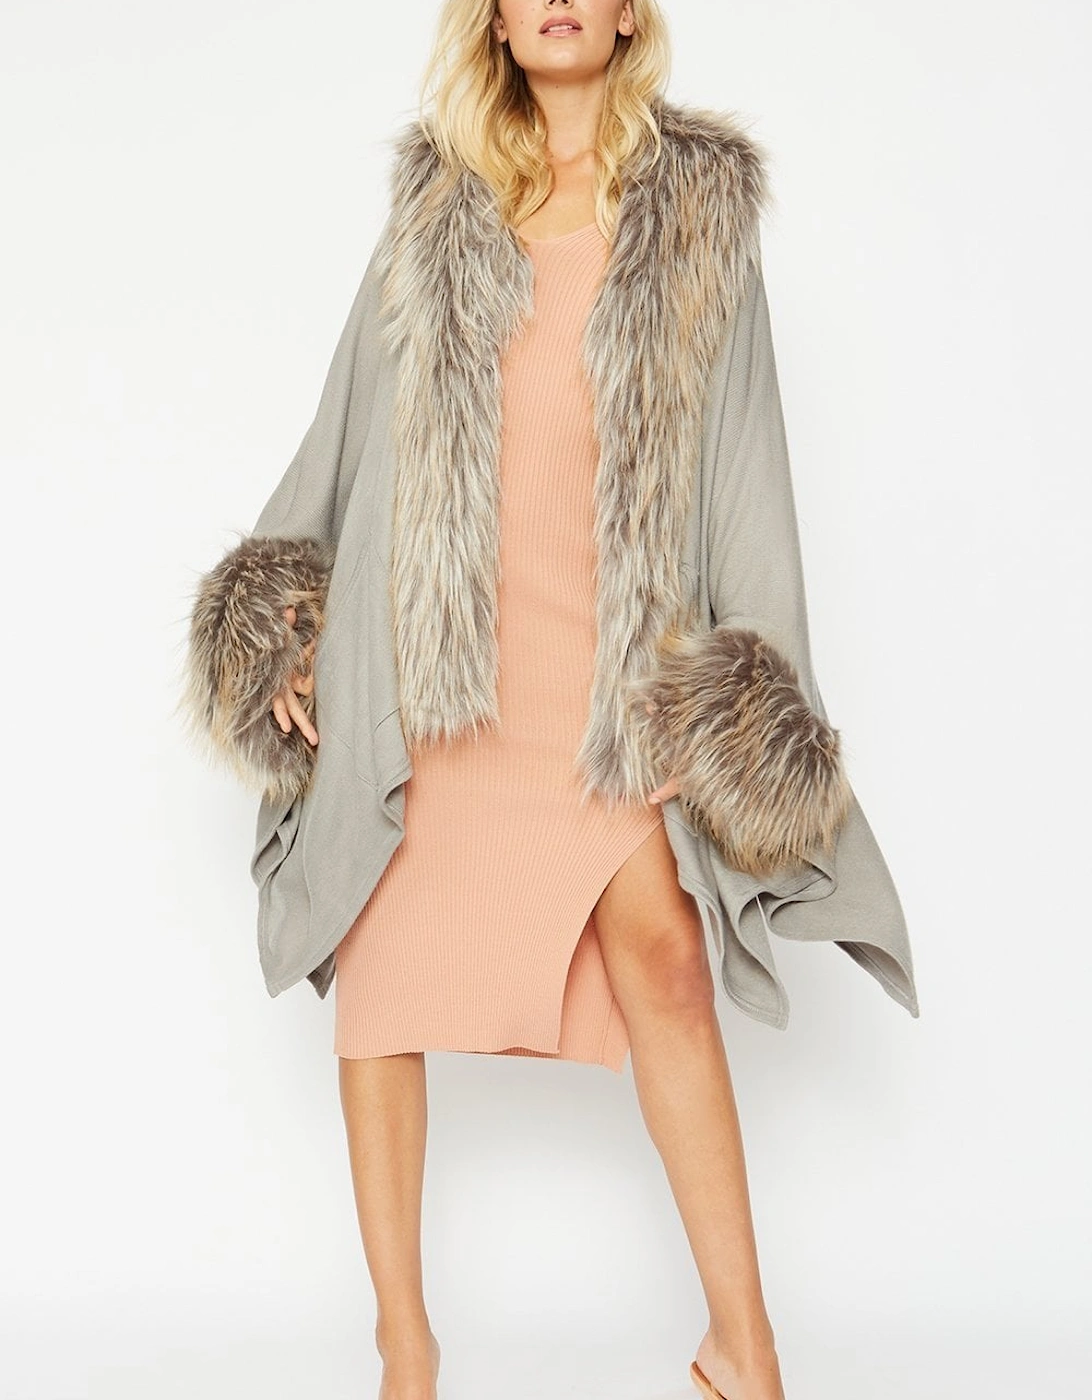 Grey Knitted Luxury Faux Fur Cape